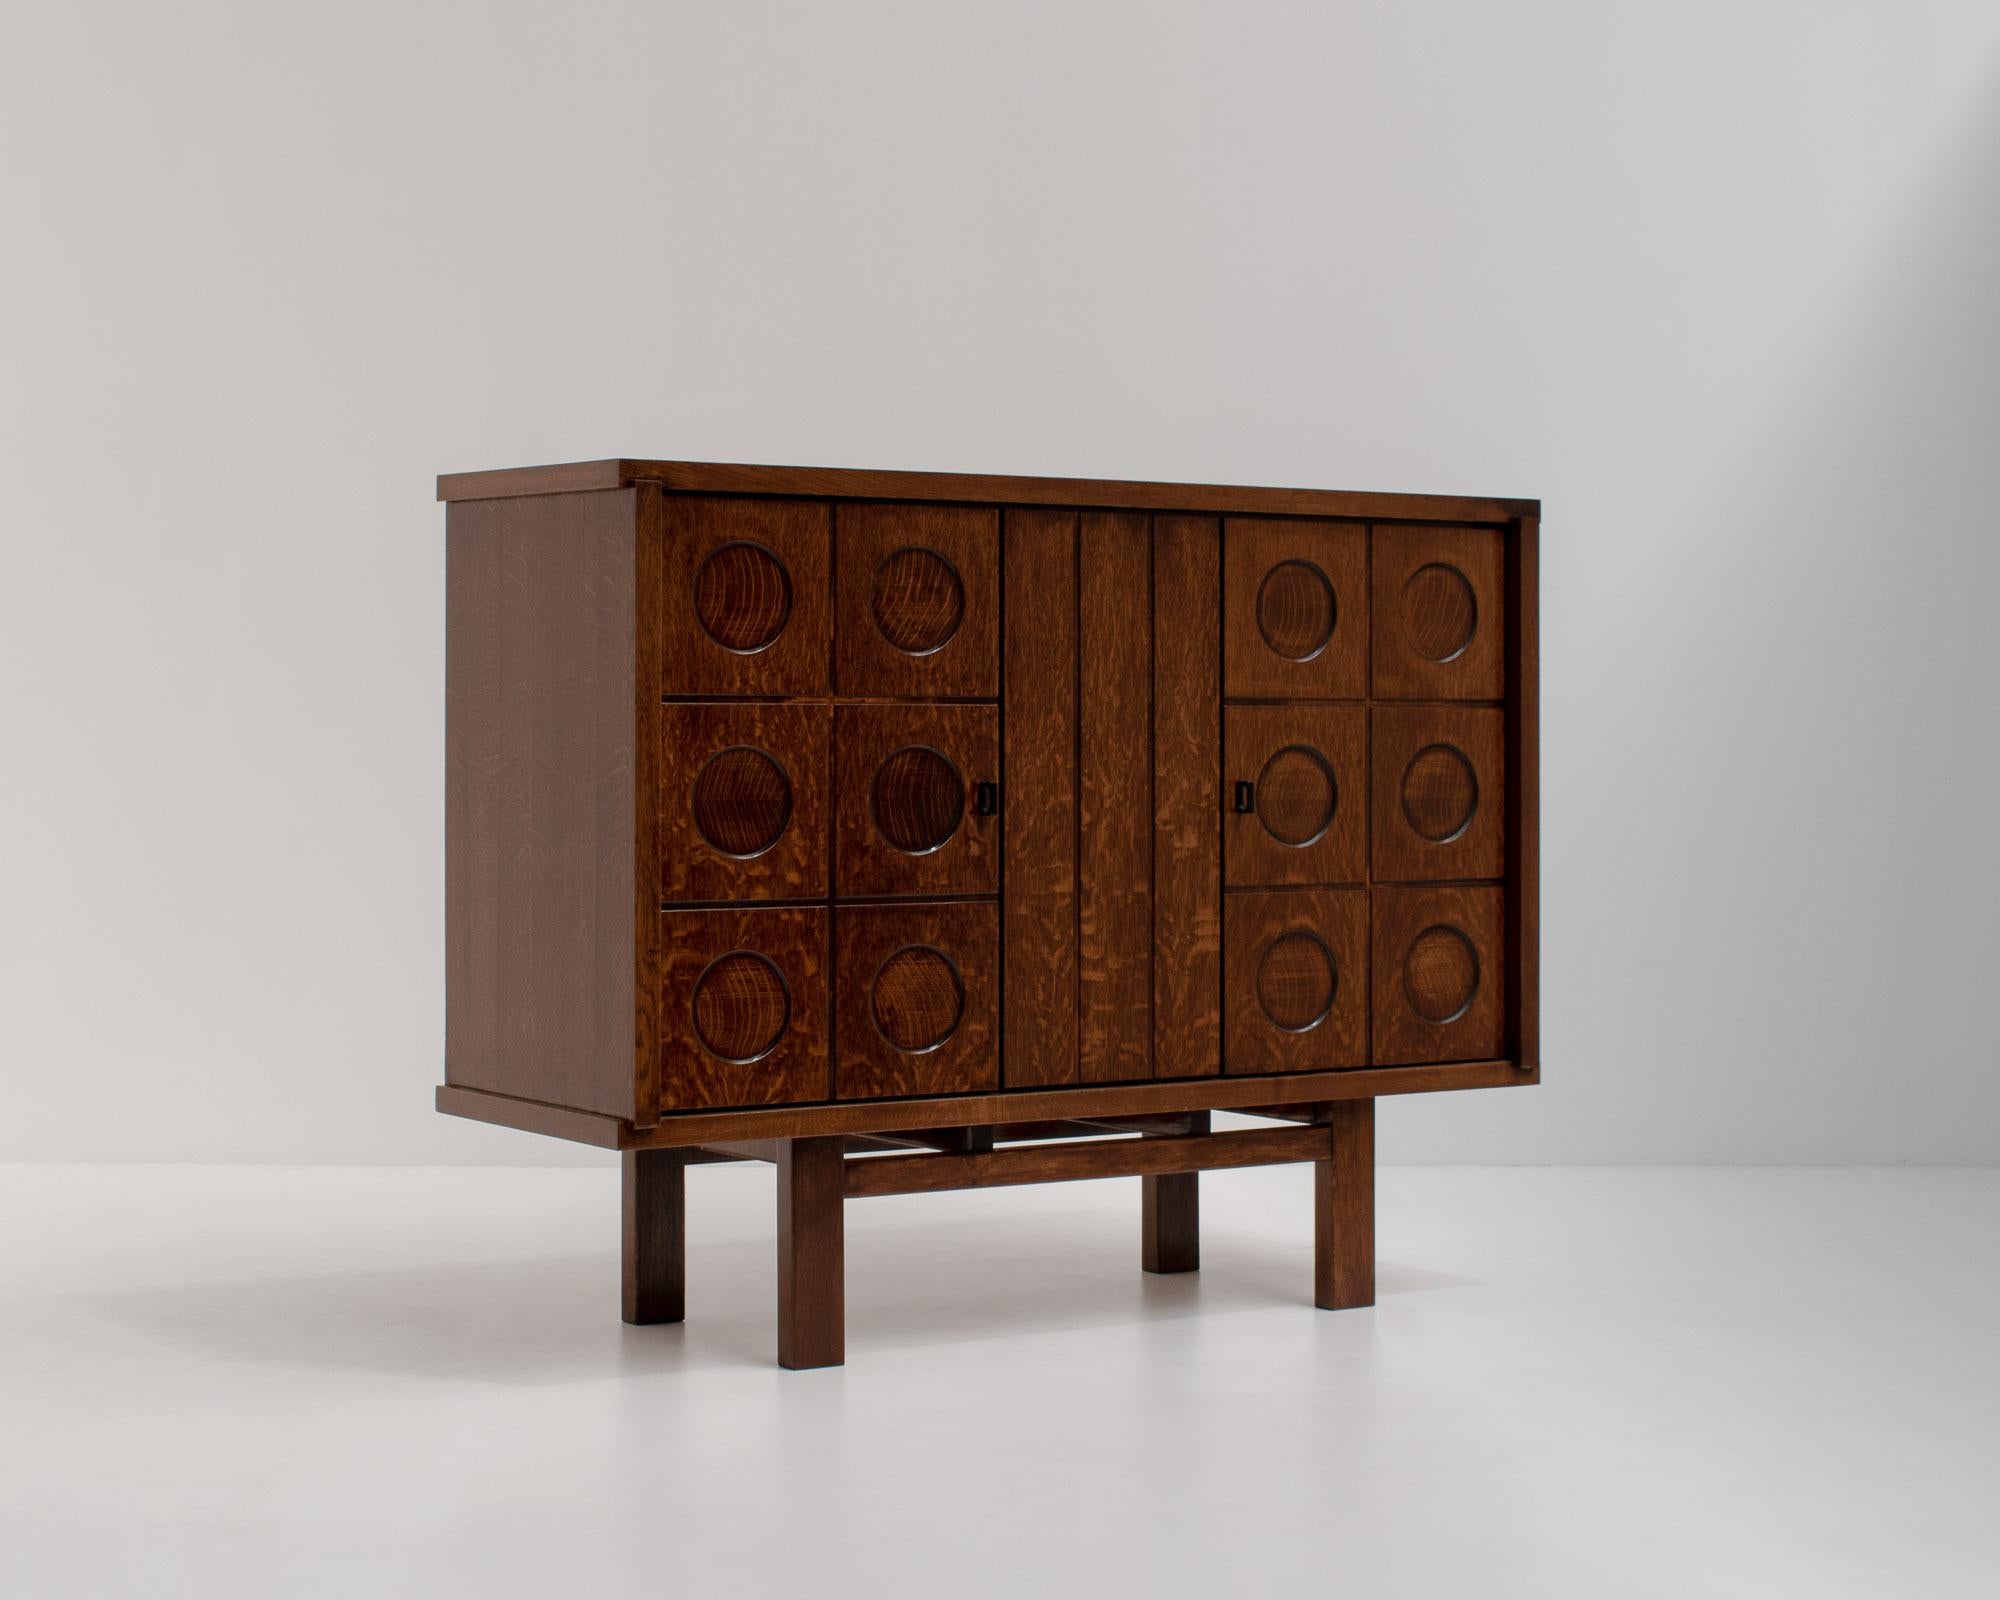 Stunning brutalist bar cabinet in dark-stained oak, Belgium, the 1970s.

If you're tired of all the black brutalist furniture, but you love the aesthetic of it, this cabinet is the ideal compromise. A timeless piece of brutalist craftmanship from